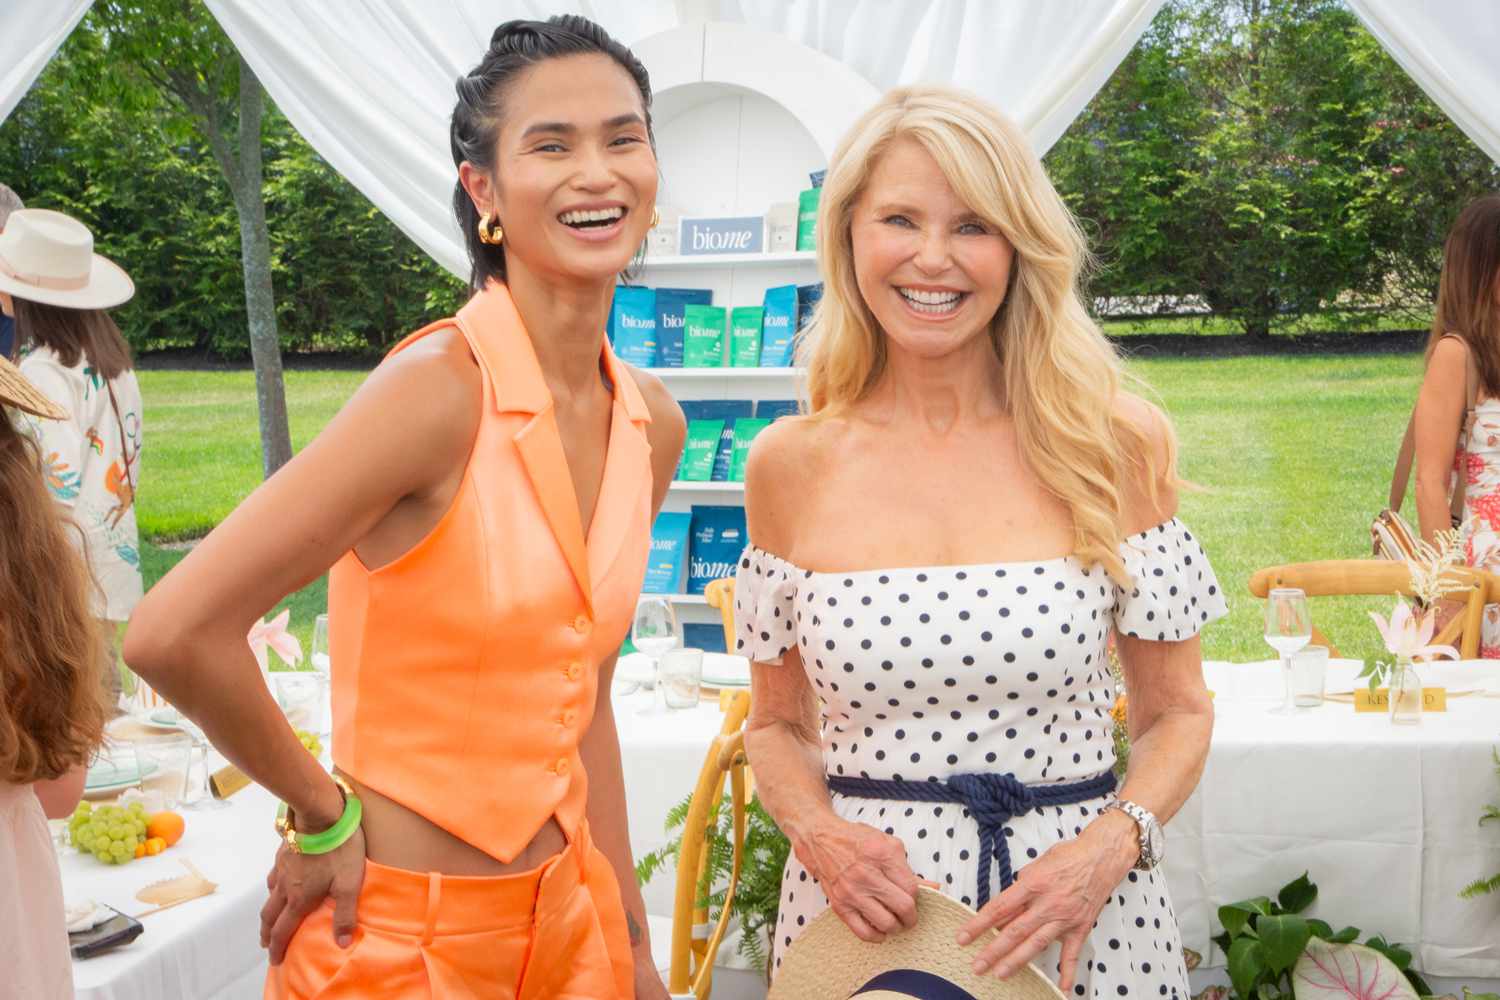 Christie Brinkley and Sports Illustrated model Sharina Gutierrez celebrated fiber brand bio.me at a luncheon in the Hamptons hosted by Social Life 